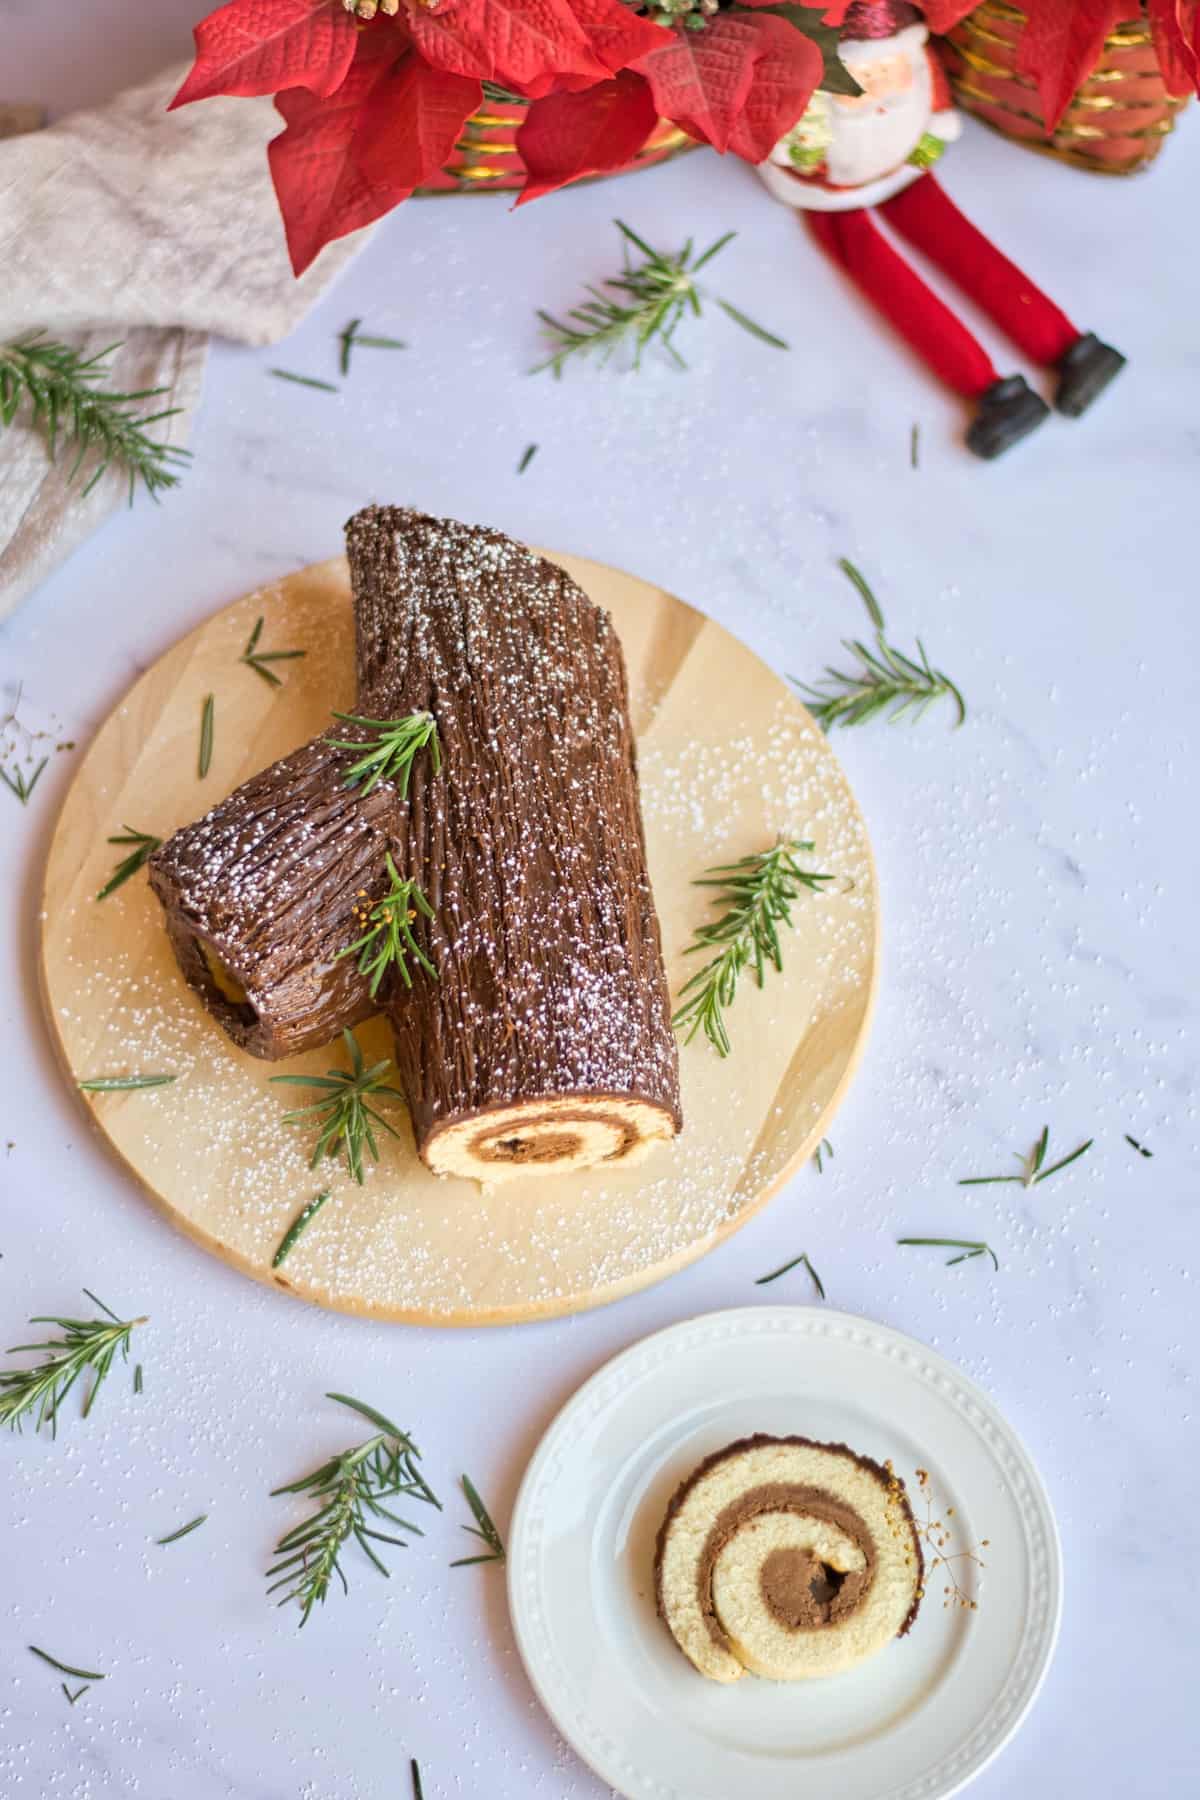 Chocolate rolled cake to look like yule log from above with Christmas decor.